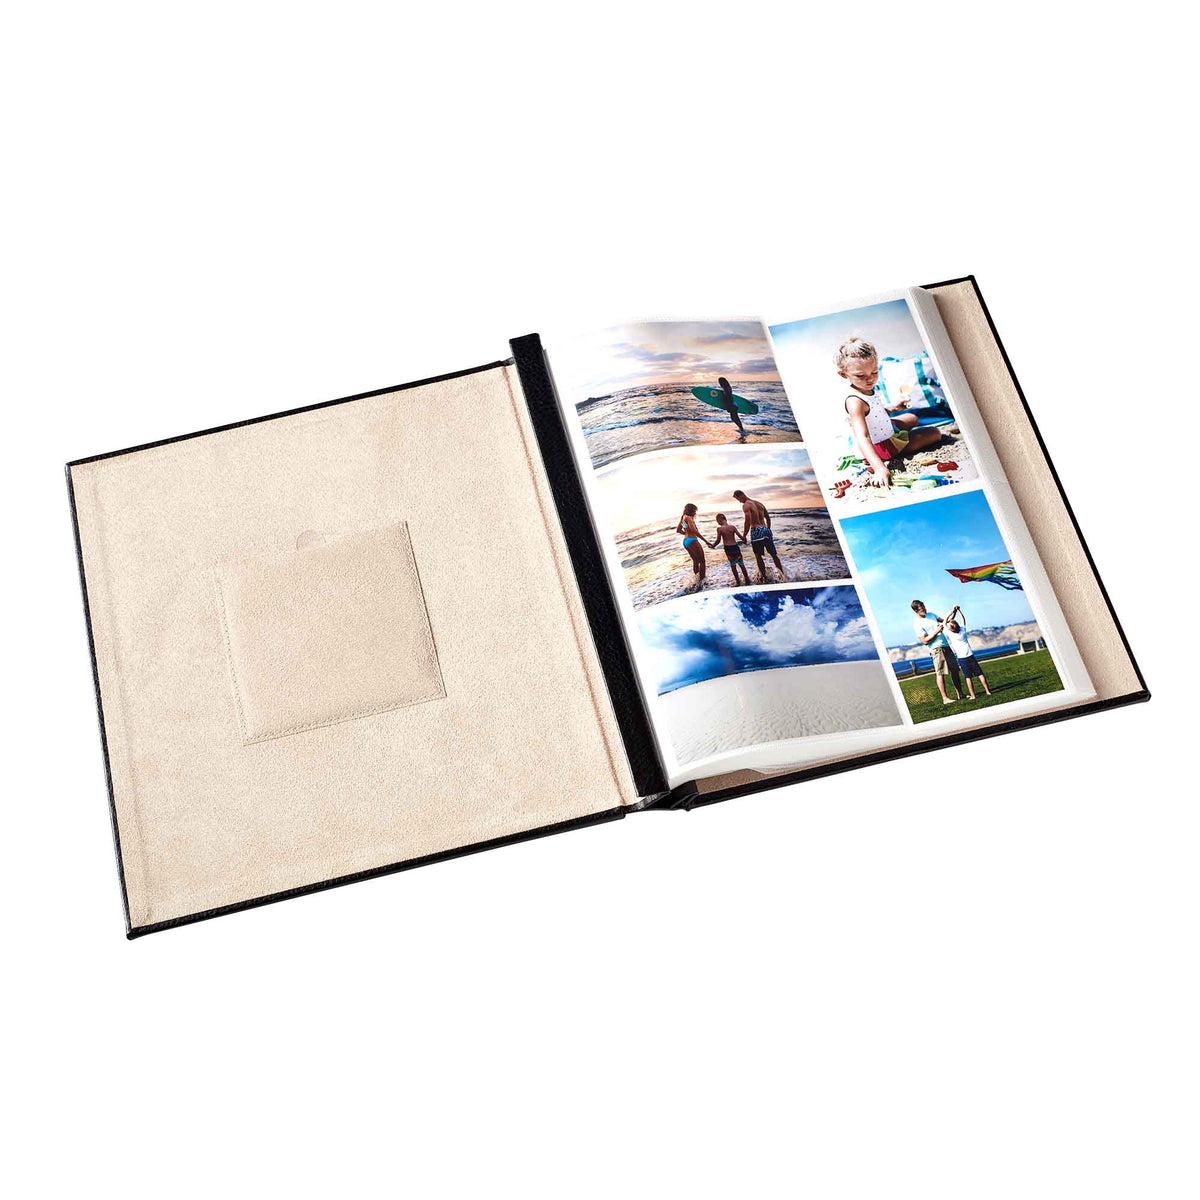 Old Town Large Photo Albums, Holds 400 4x6 Photos (Leather Navy